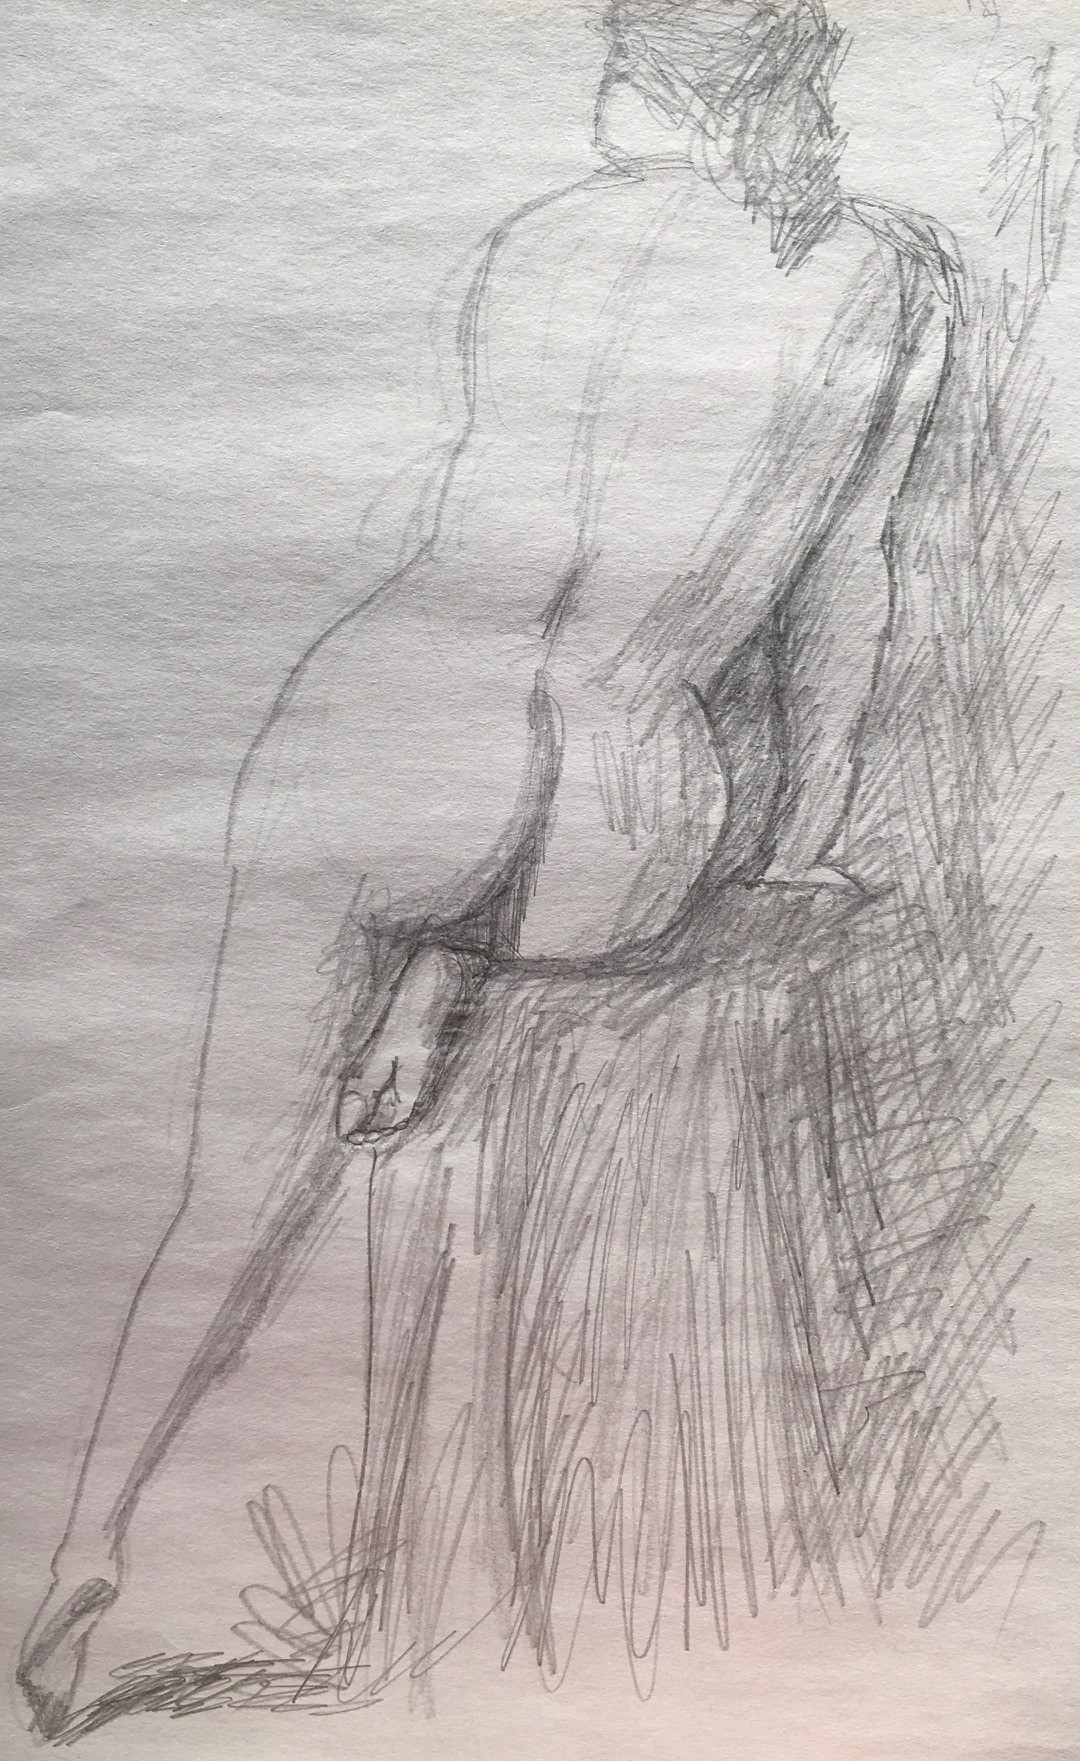 Gesture Drawing #1, 2019
Pencil on Paper
11"W x 17.5"H, Walli White, artist